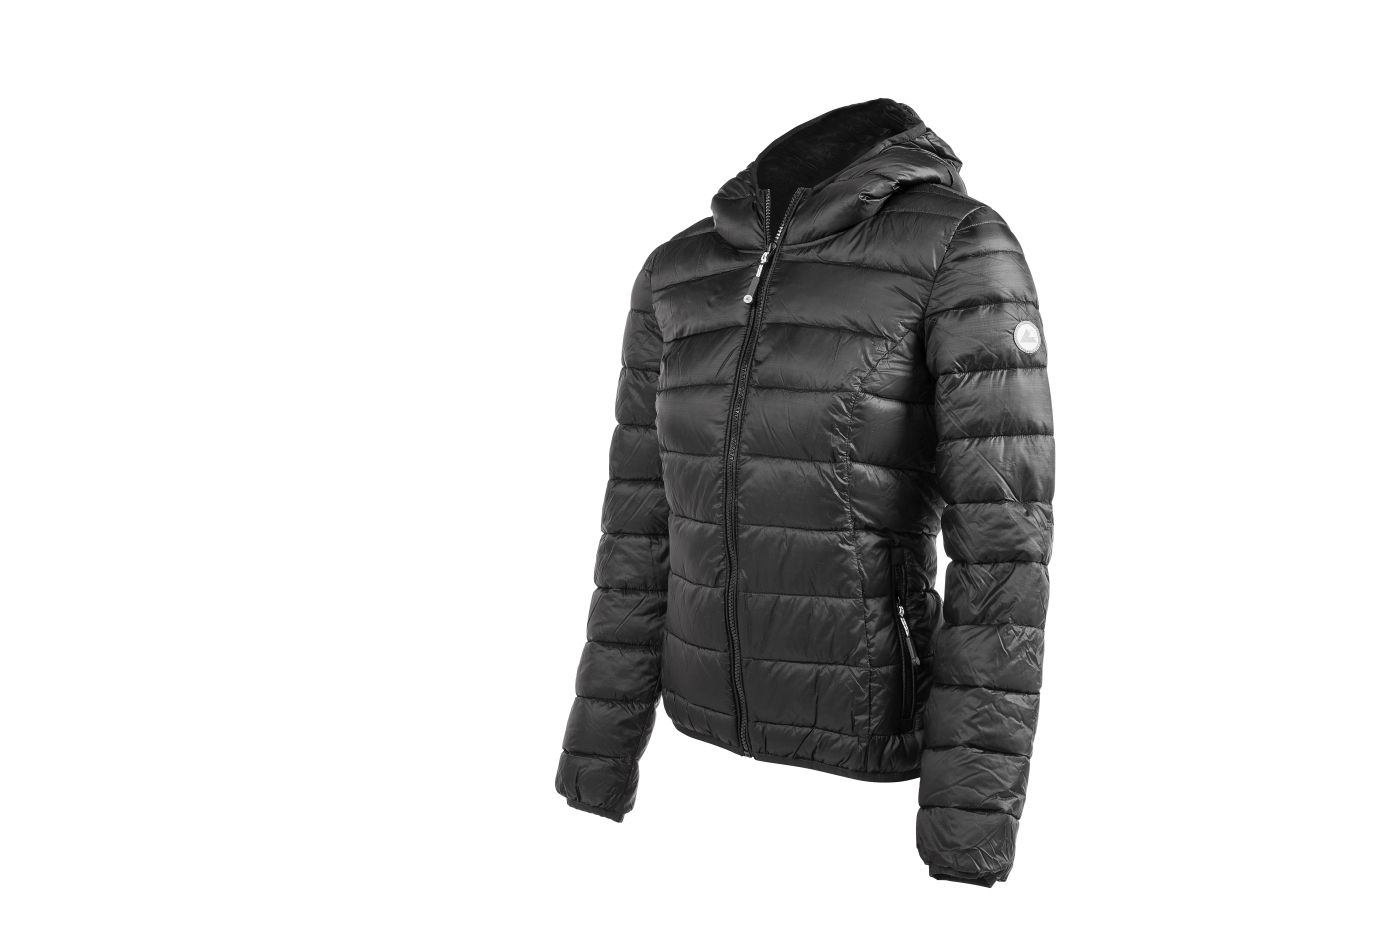 Hooded quilted jacket "Cortina", women